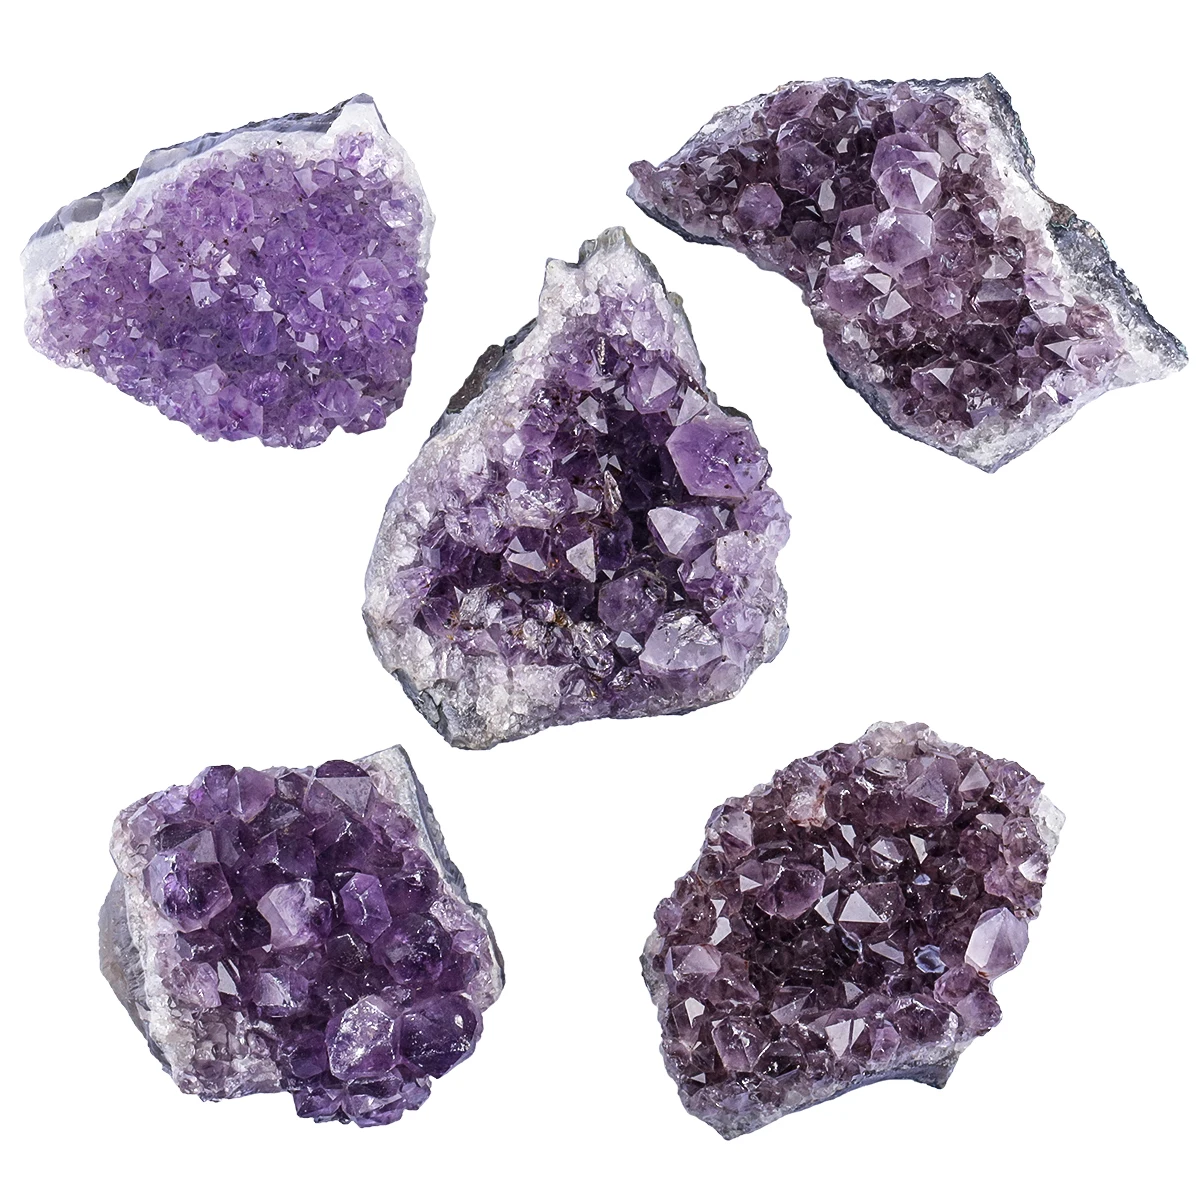 400g Natural Amethyst Cluster Healing Rough Gemstone Mineral Specimen Chakra Balancing For Home Decoration natural minerals crystal money tree with rough amethyst cluster base healing gemstone craft gift nordic home decoration ornament